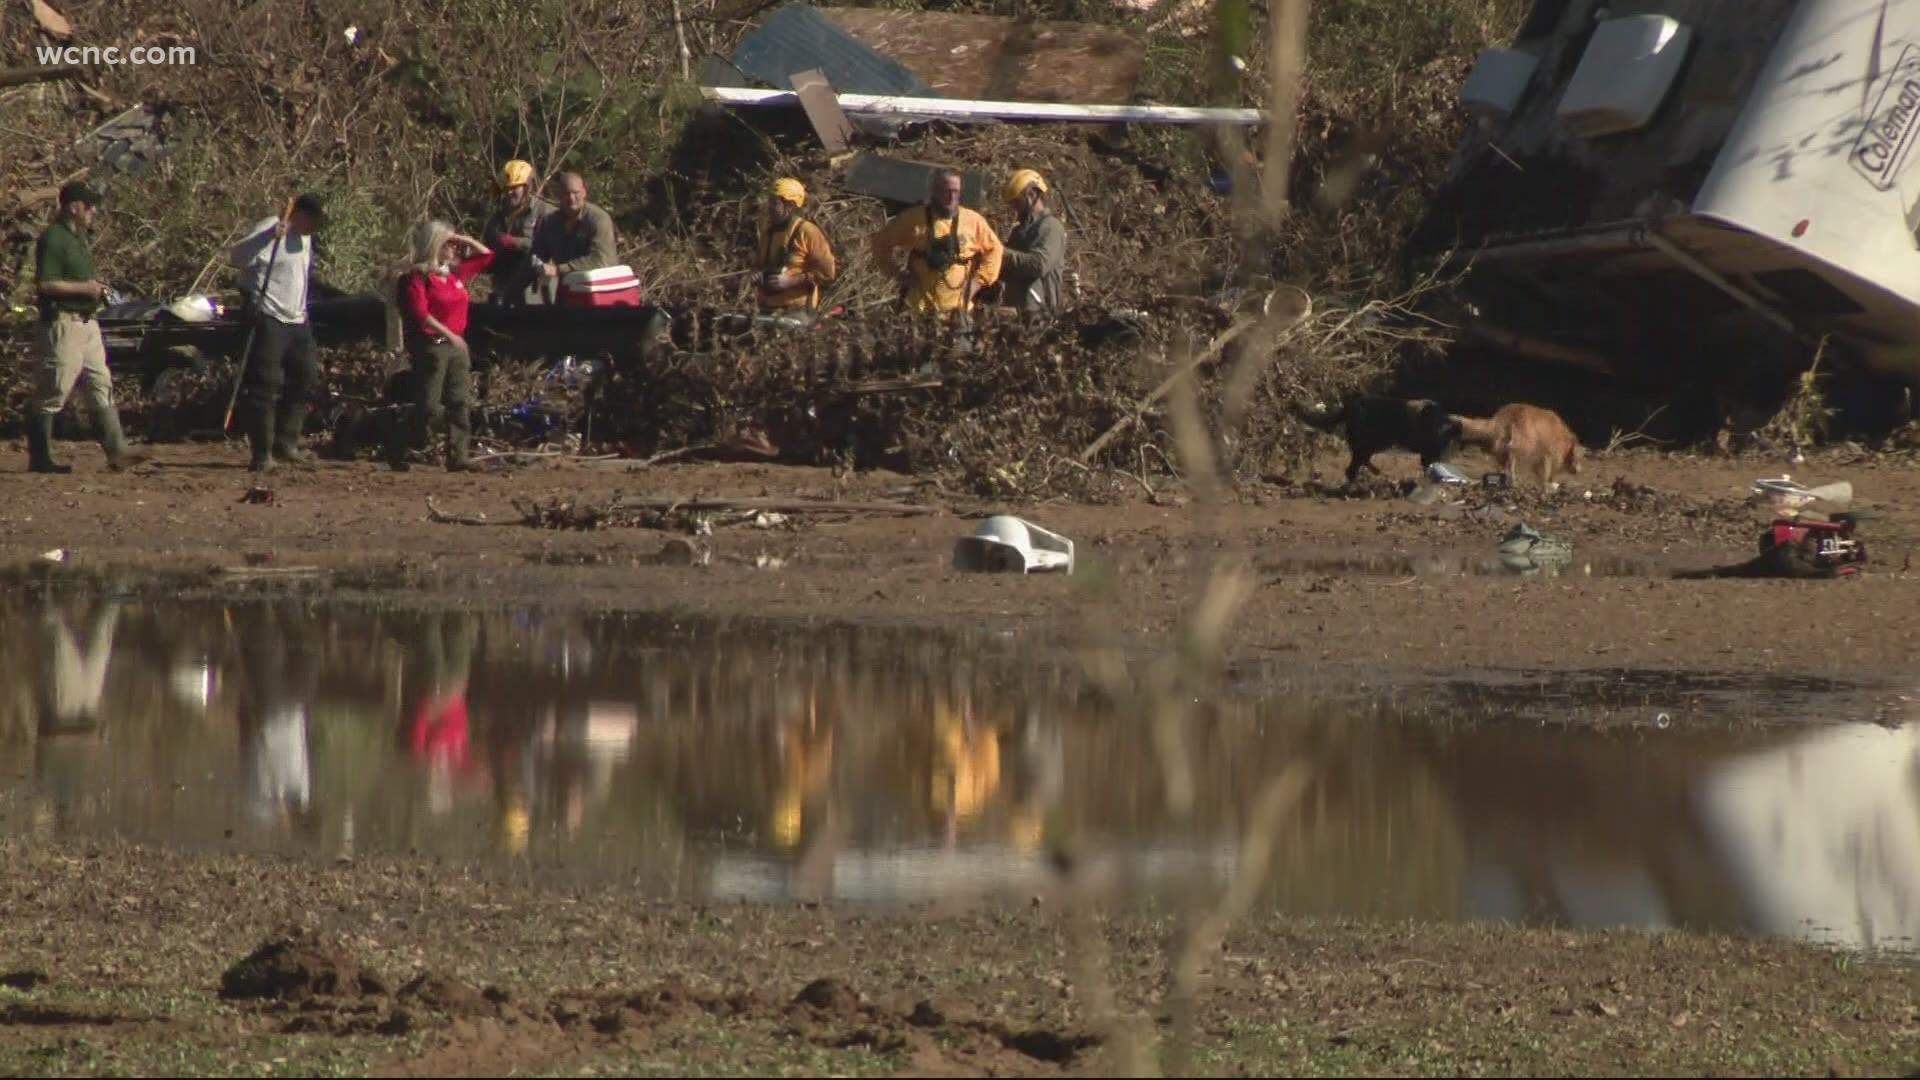 Officials said five people were killed after the Hiddenite Family Campground flooded. More than 30 people were rescued from the rising floodwaters.